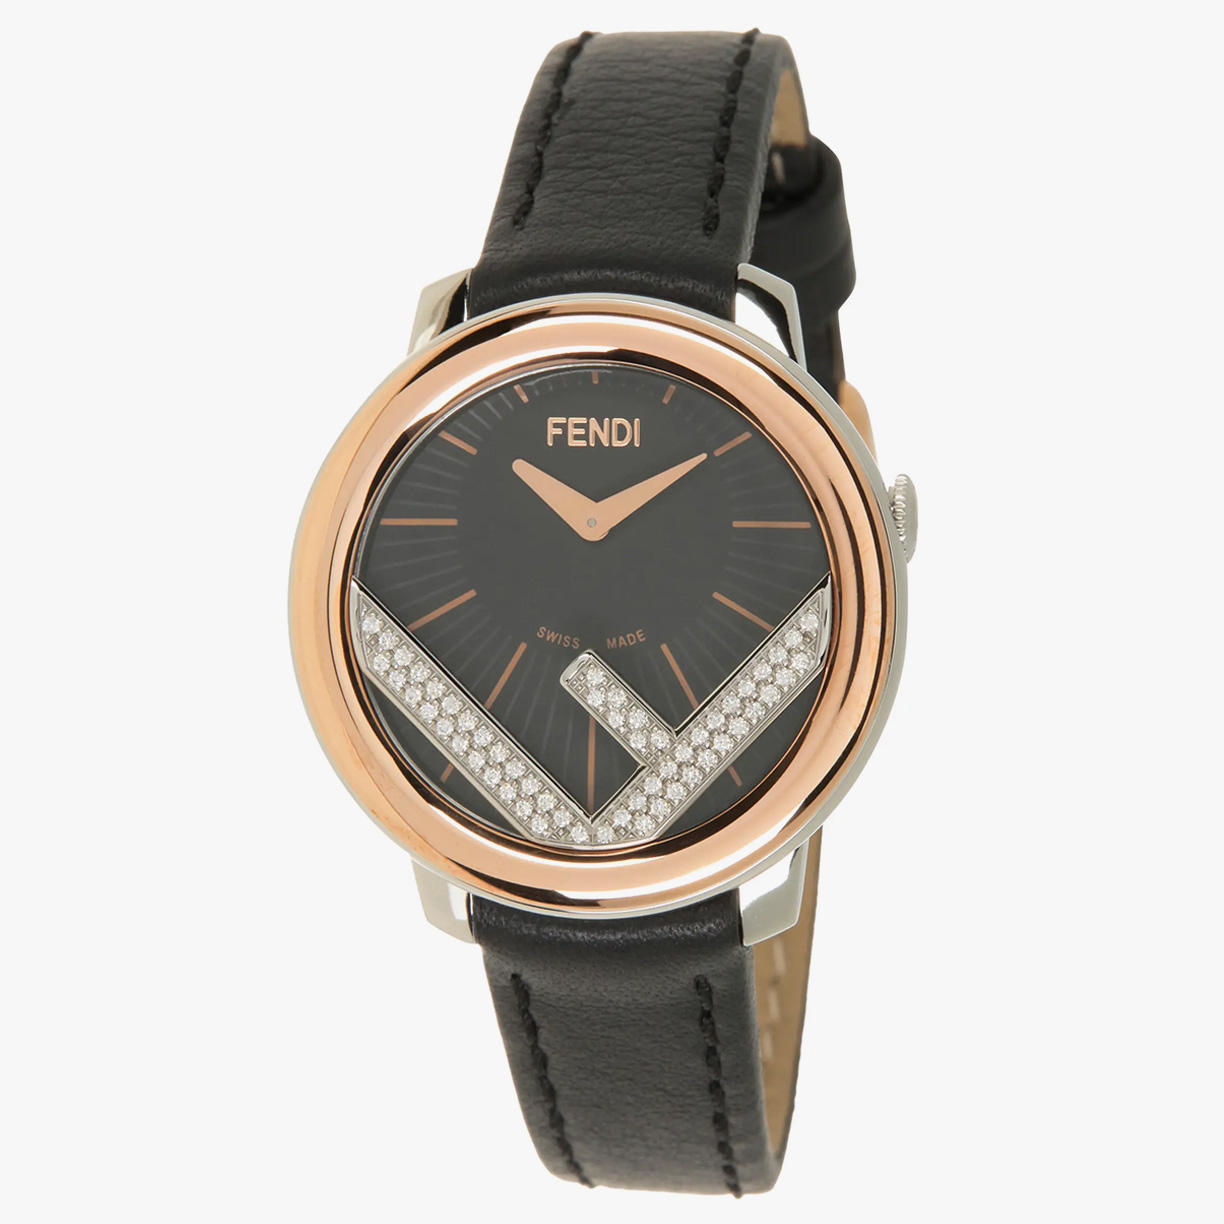 Designer Watches for All Up to 50% Off Feat. Fendi